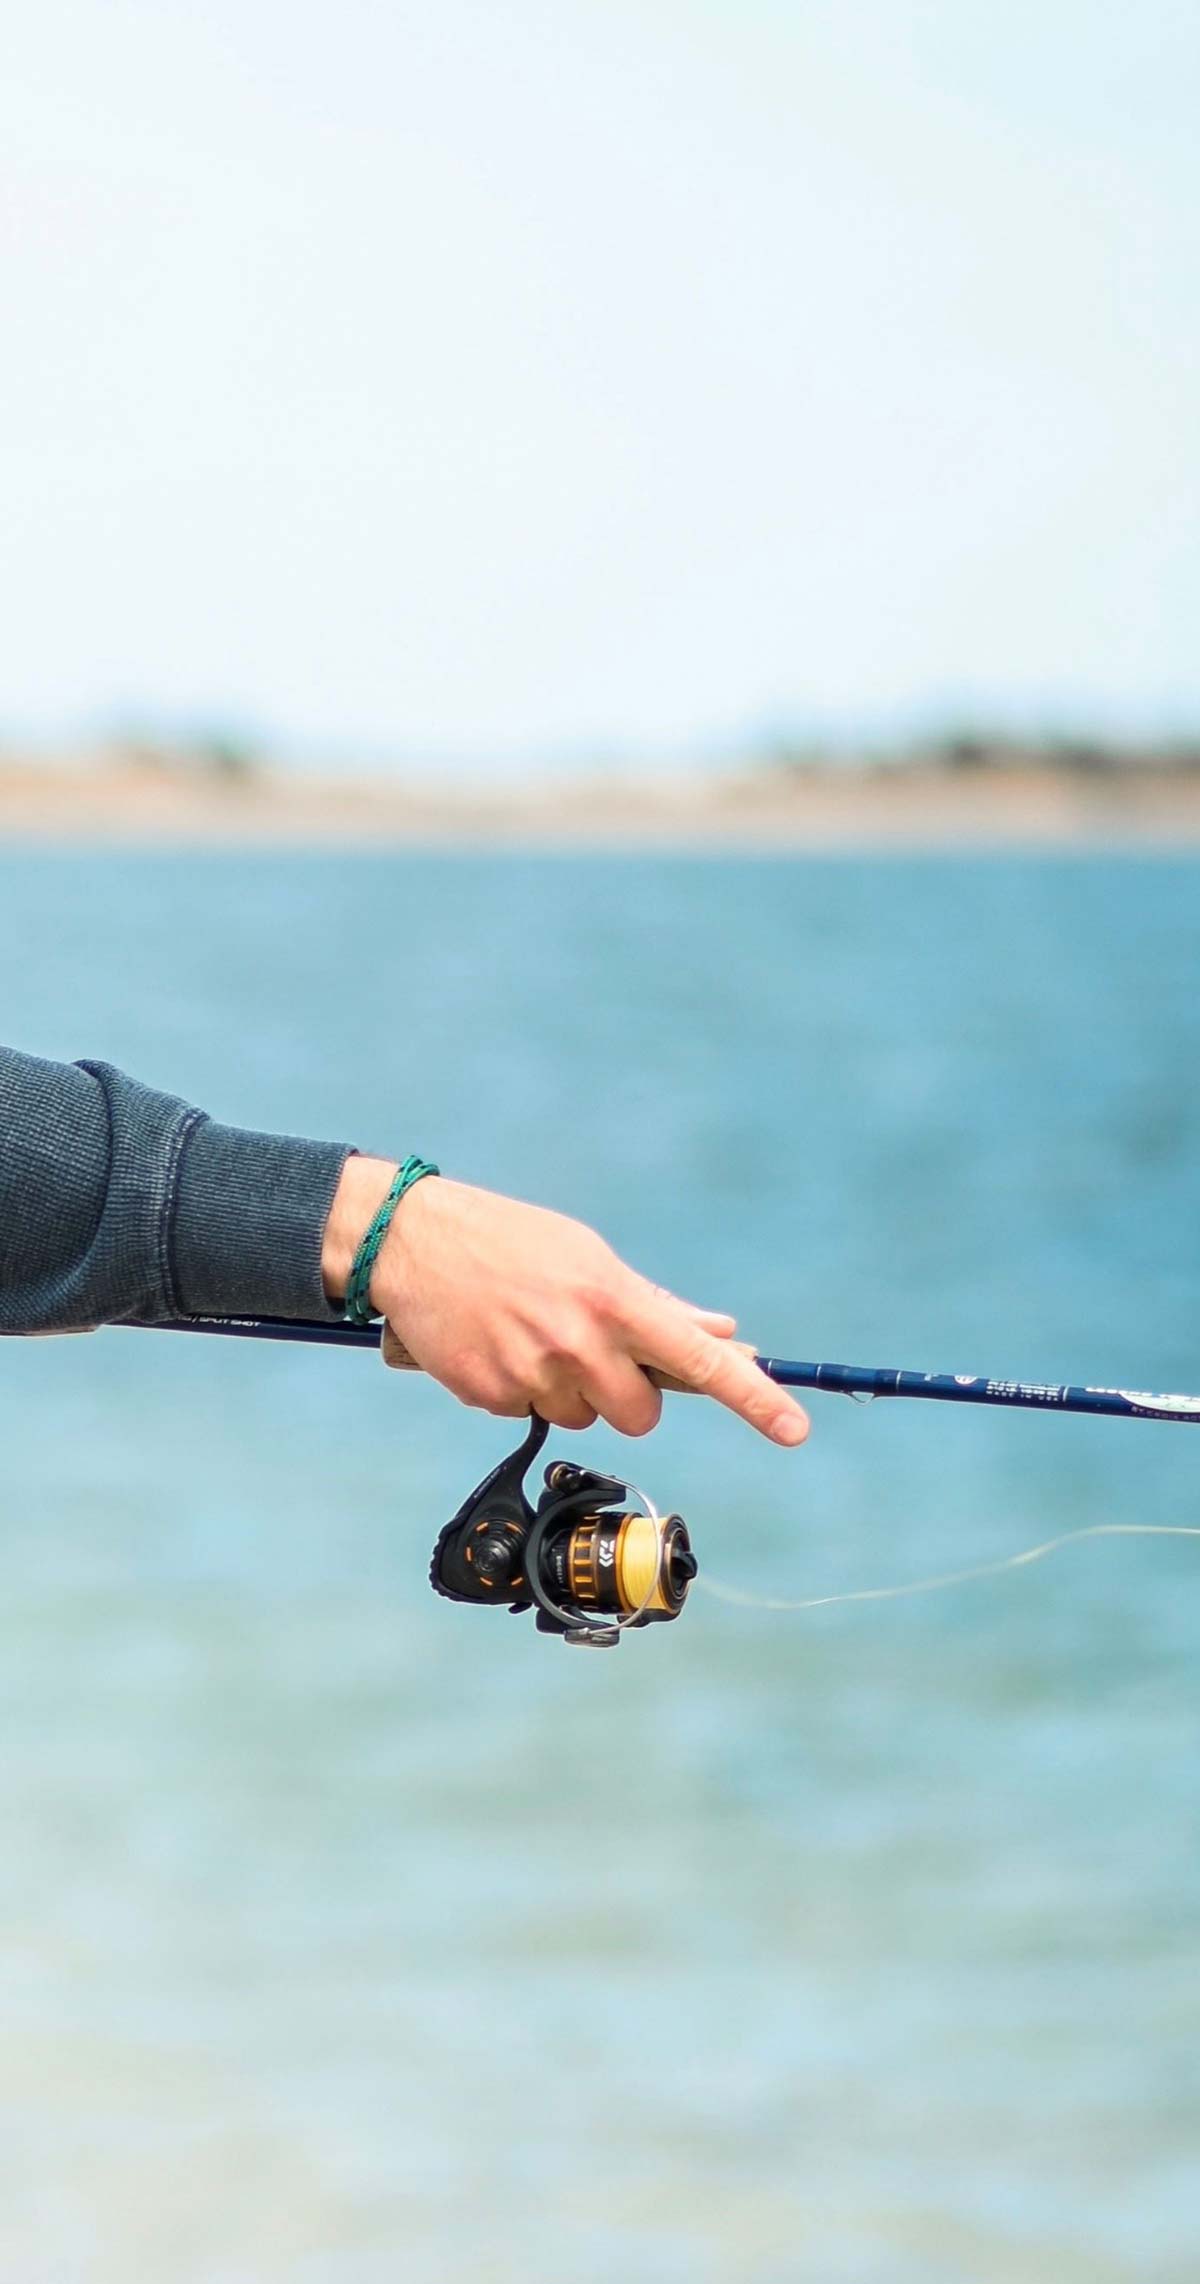 Can I Use Braided Line Fly Fishing?